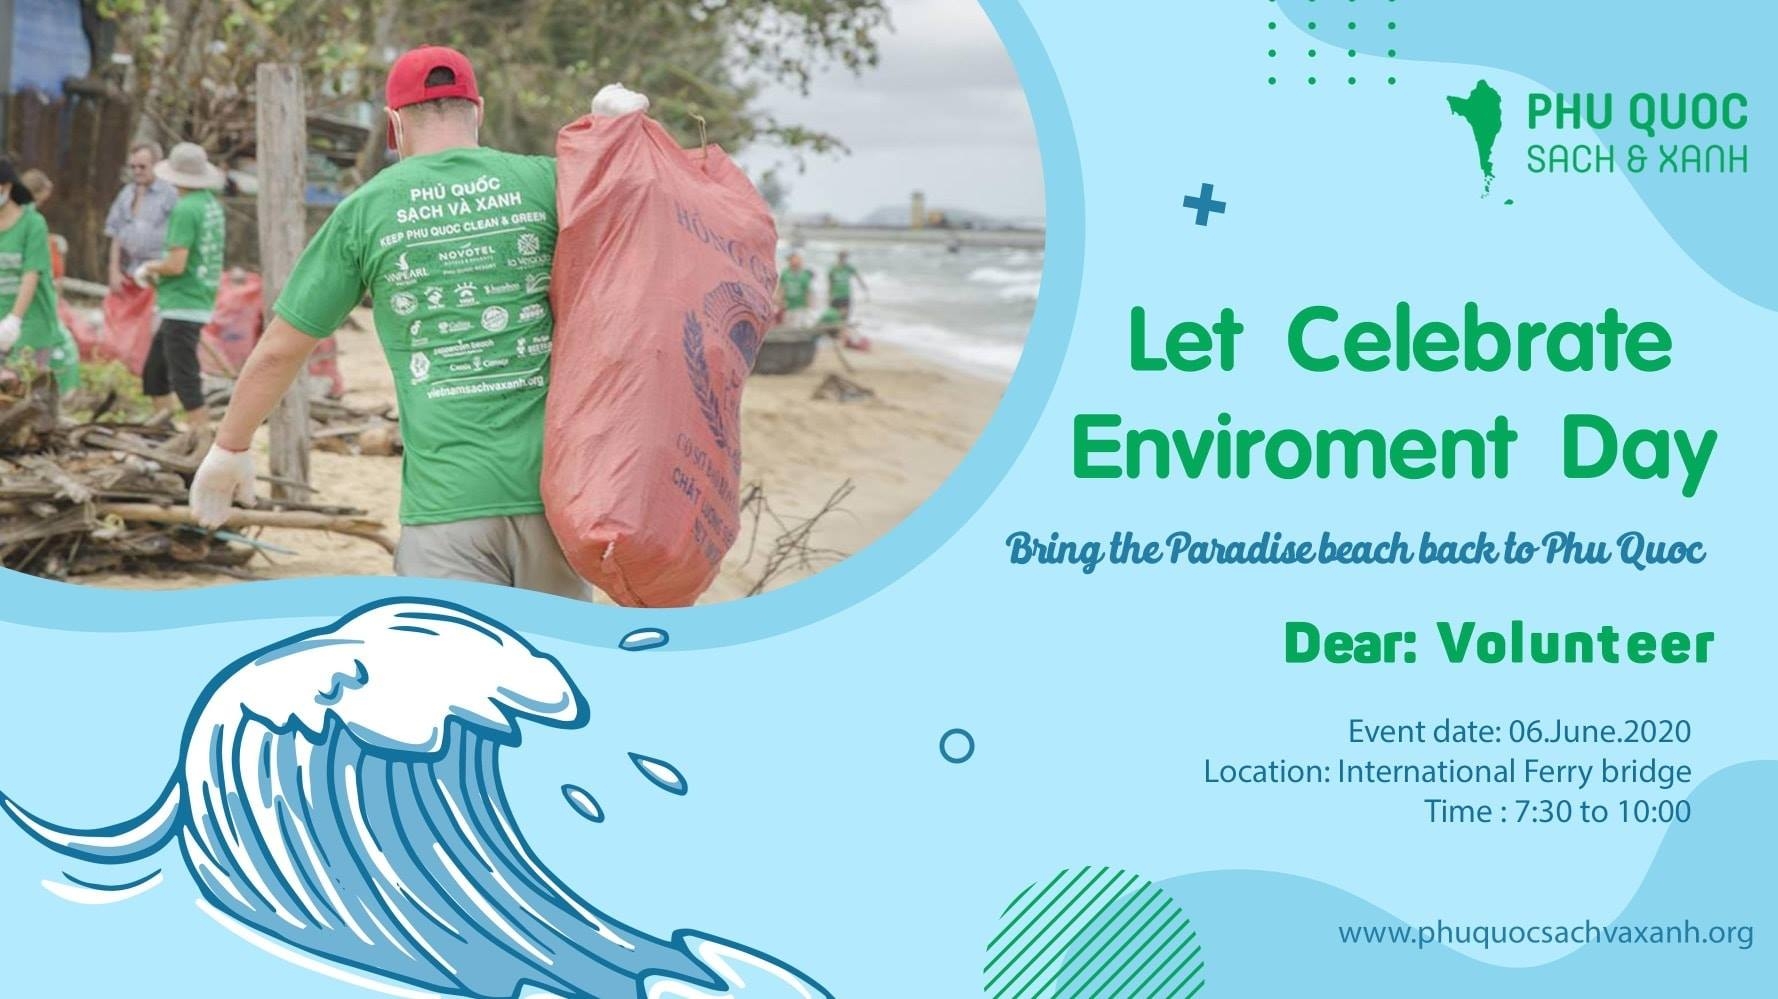 Events launced to promote single-use plastic reduction in Vietnam's pearl island